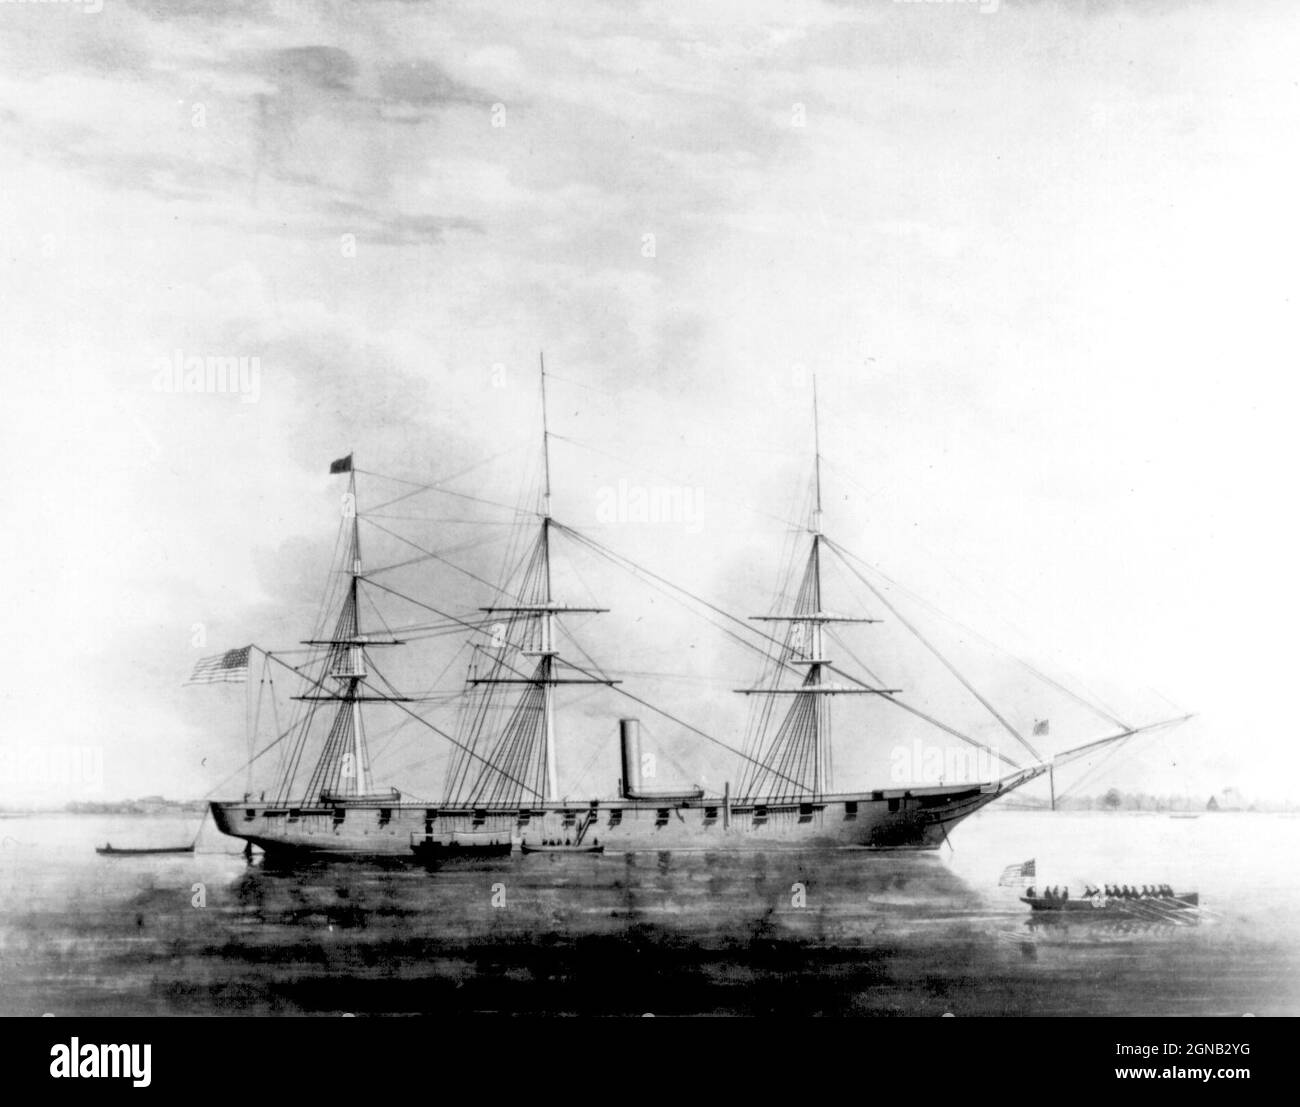 USS Hartford, a sloop-of-war, steamer, was the first ship of the United States Navy named for Hartford, the capital of Connecticut. Hartford served in several prominent campaigns in the American Civil War as the flagship of David G. Farragut, most notably the Battle of Mobile Bay in 1864. She survived until 1956, when she sank awaiting restoration at Norfolk, Virginia. Stock Photo